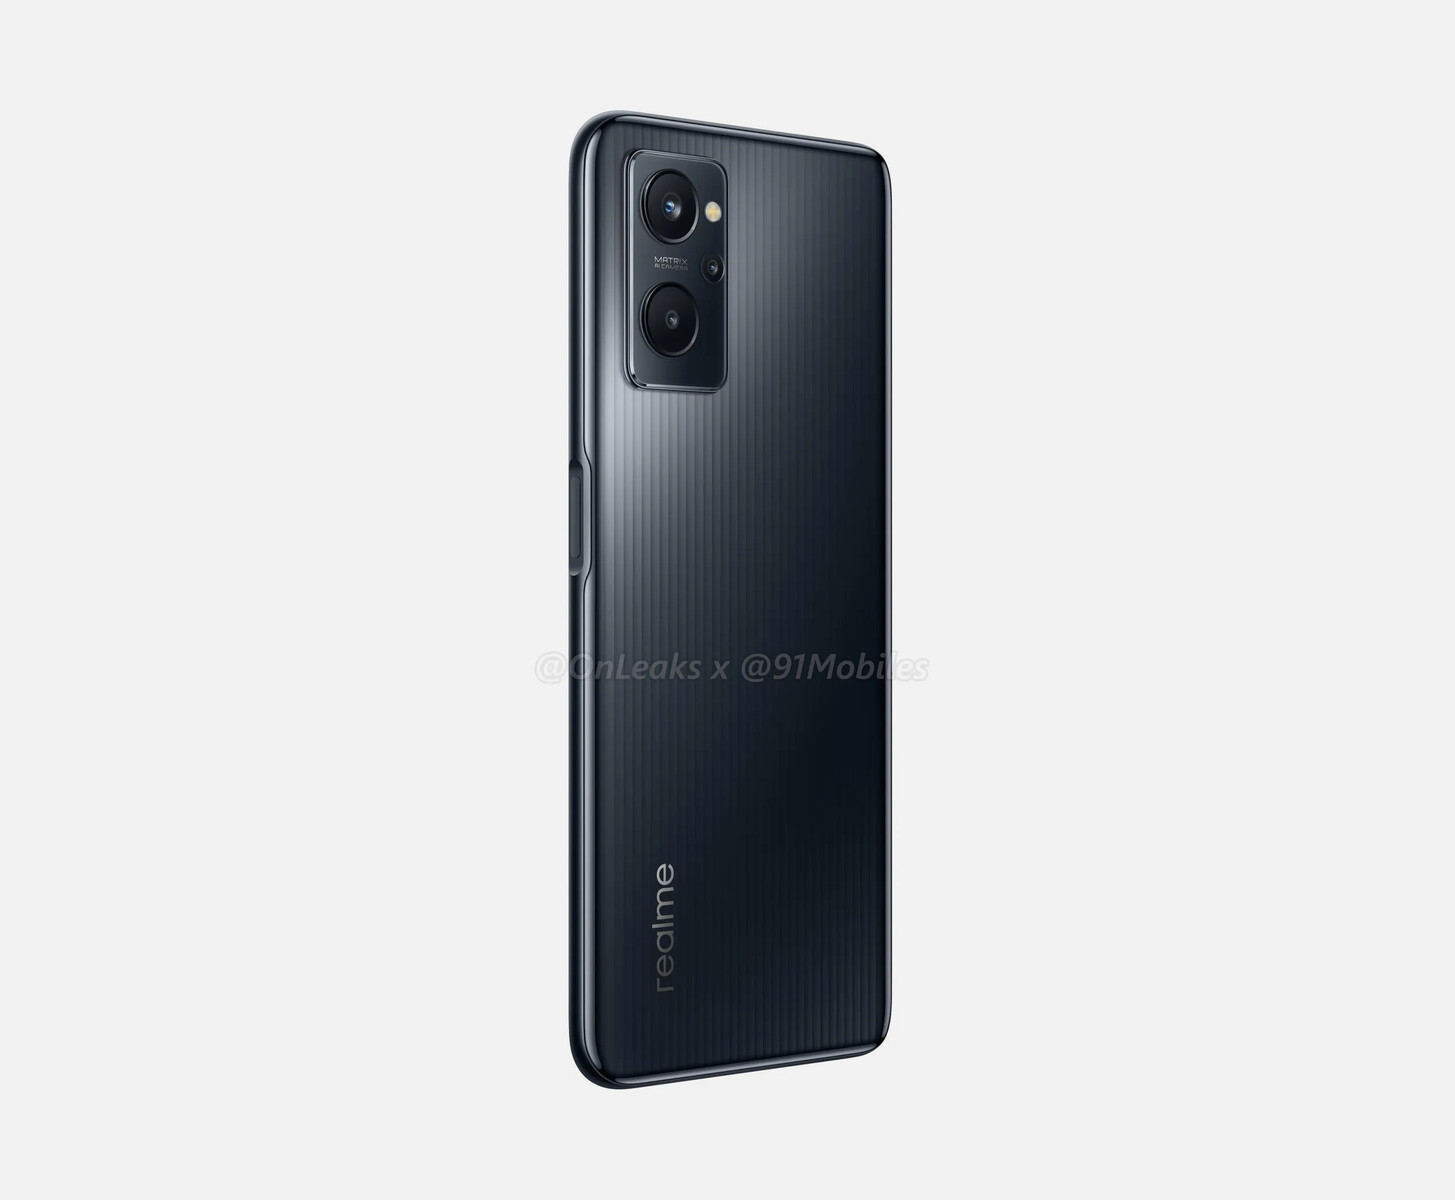 Realme 9i Live Image Spotted on FCC Listing; Battery Specifications,  Dimensions Tipped